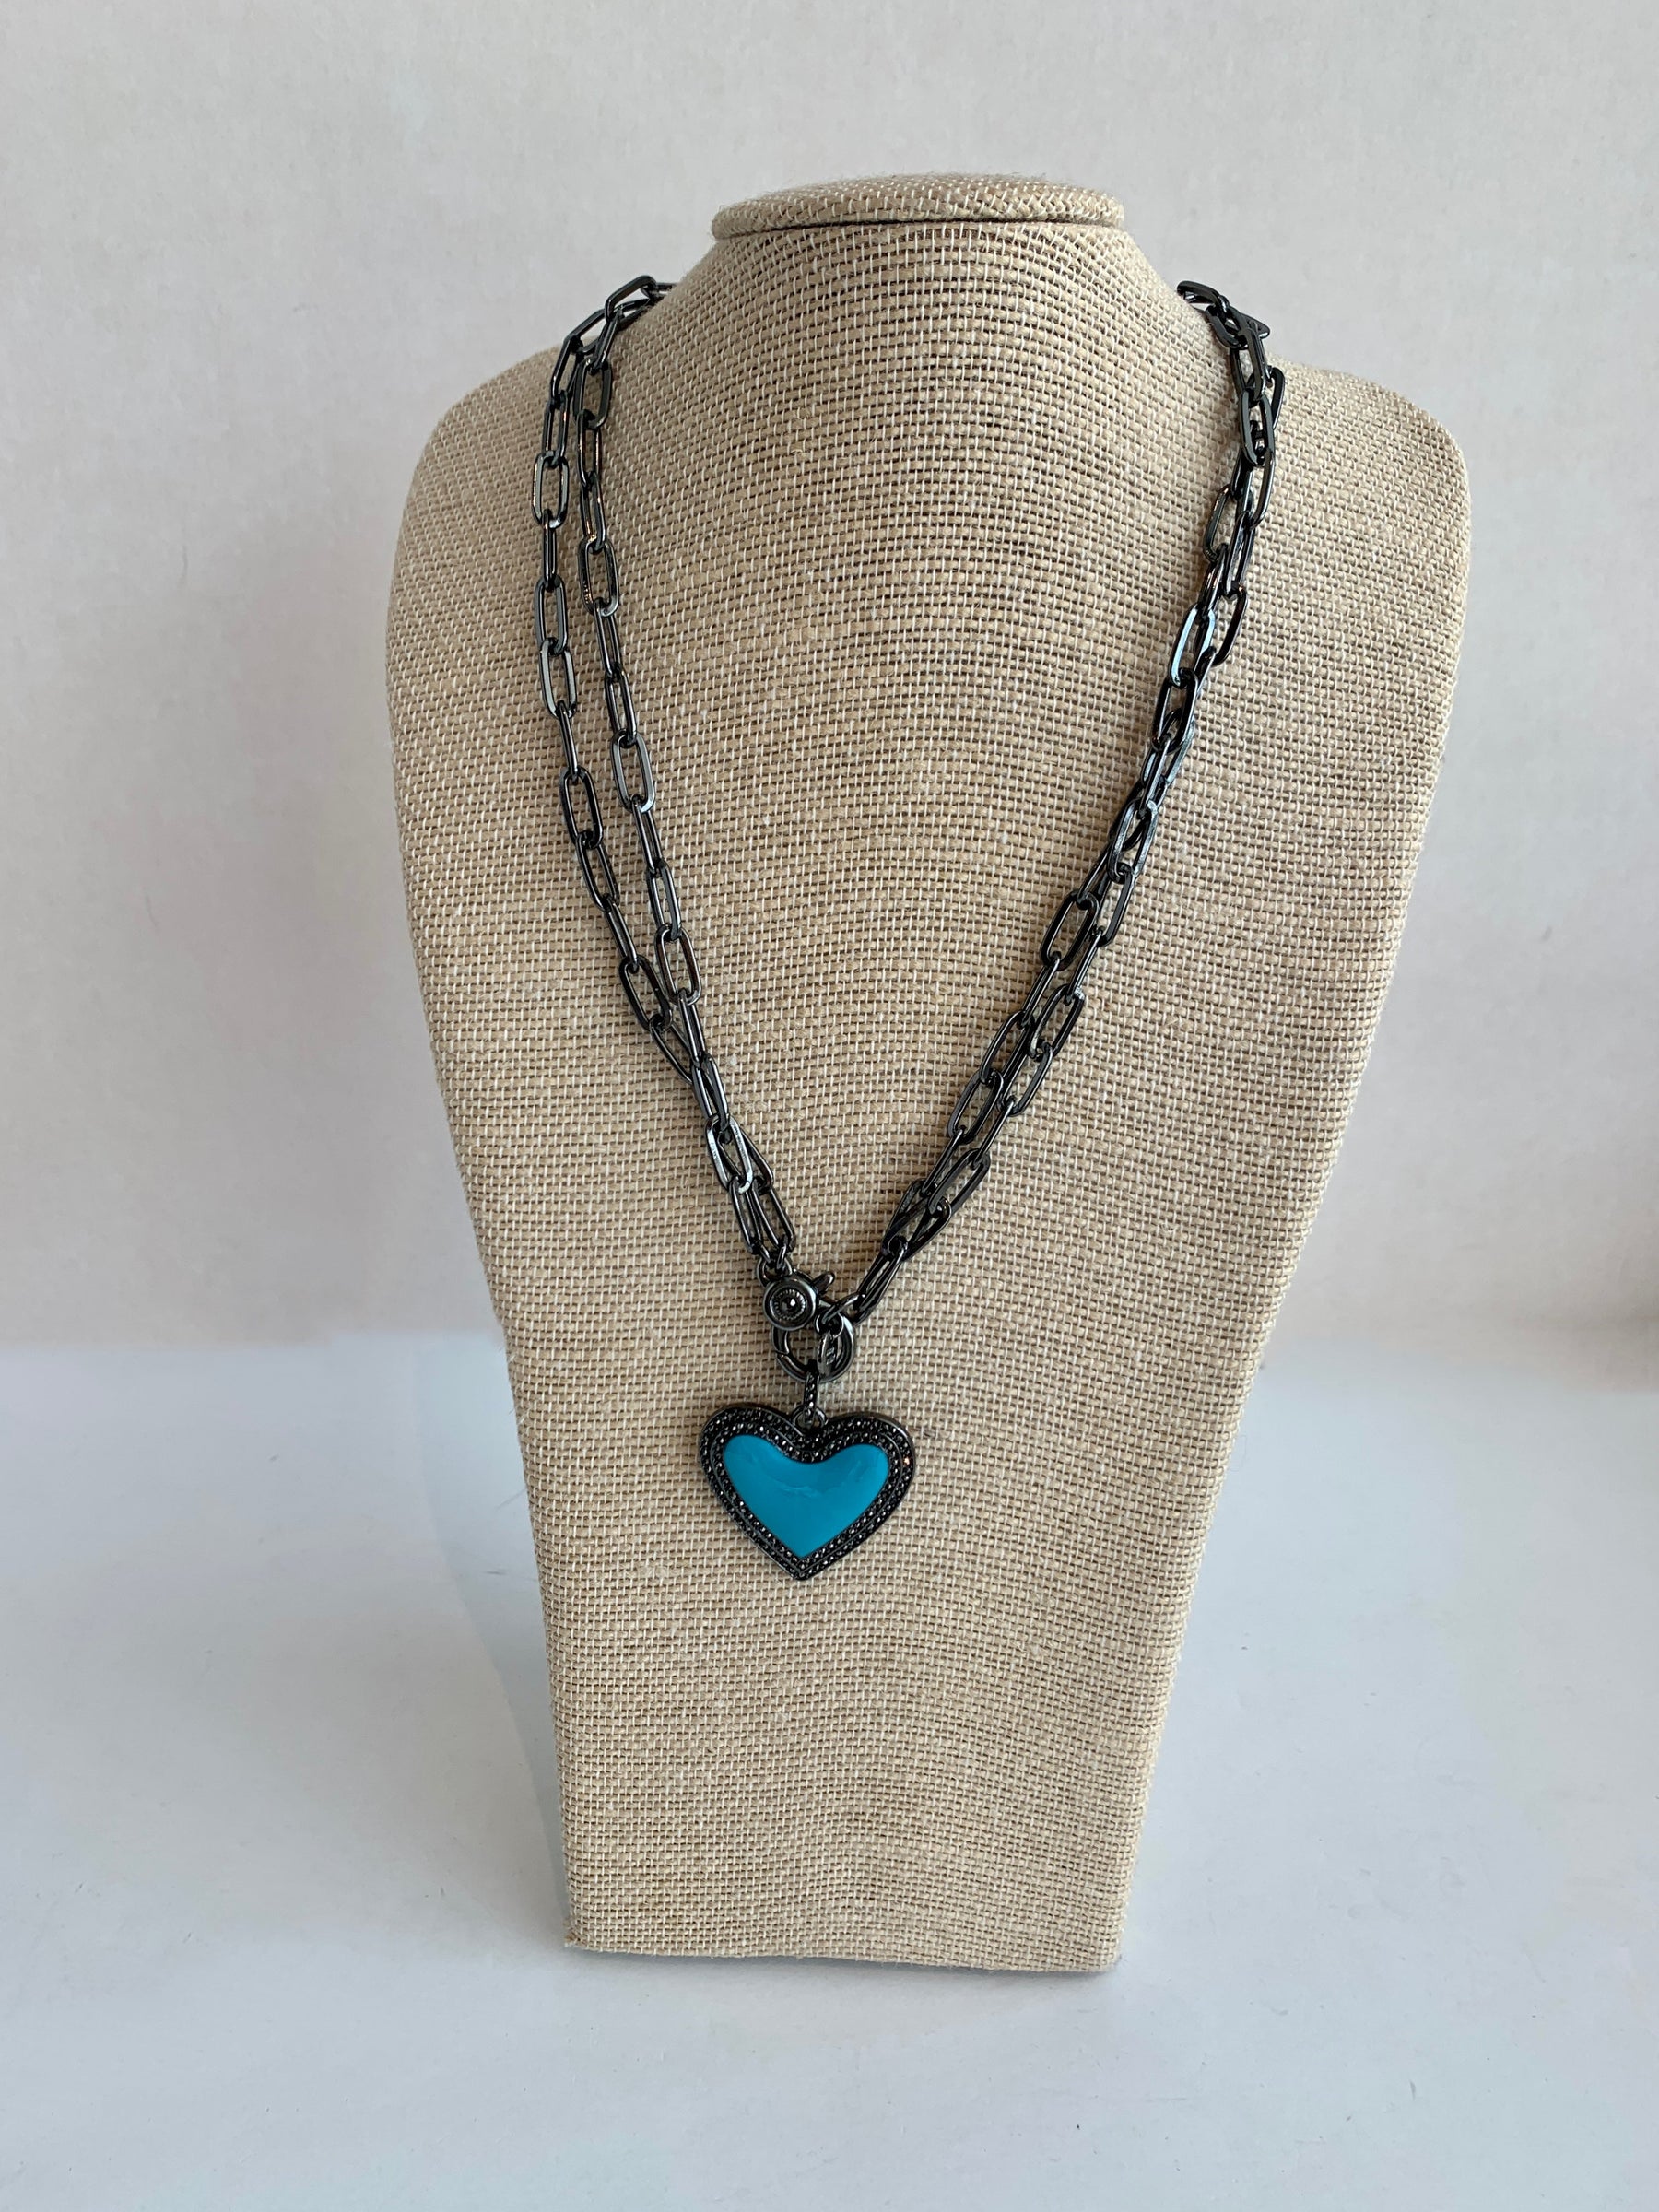 Heart chain link necklace